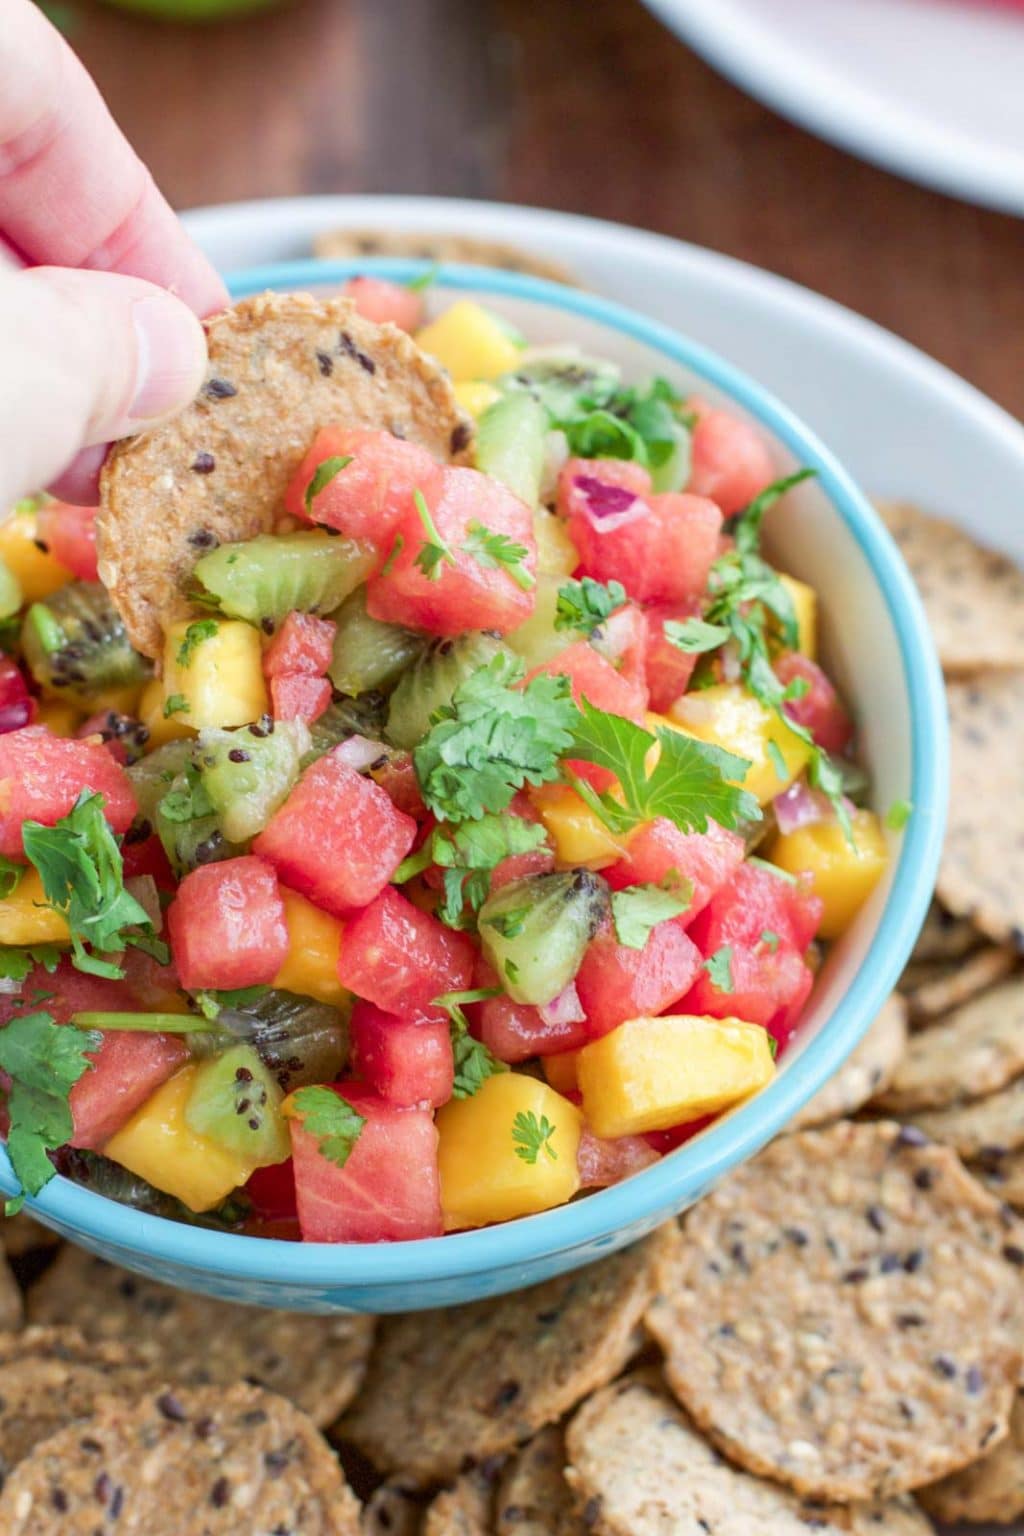 A hand dipping a cracker into a bowl filled with watermelon mango salsa.